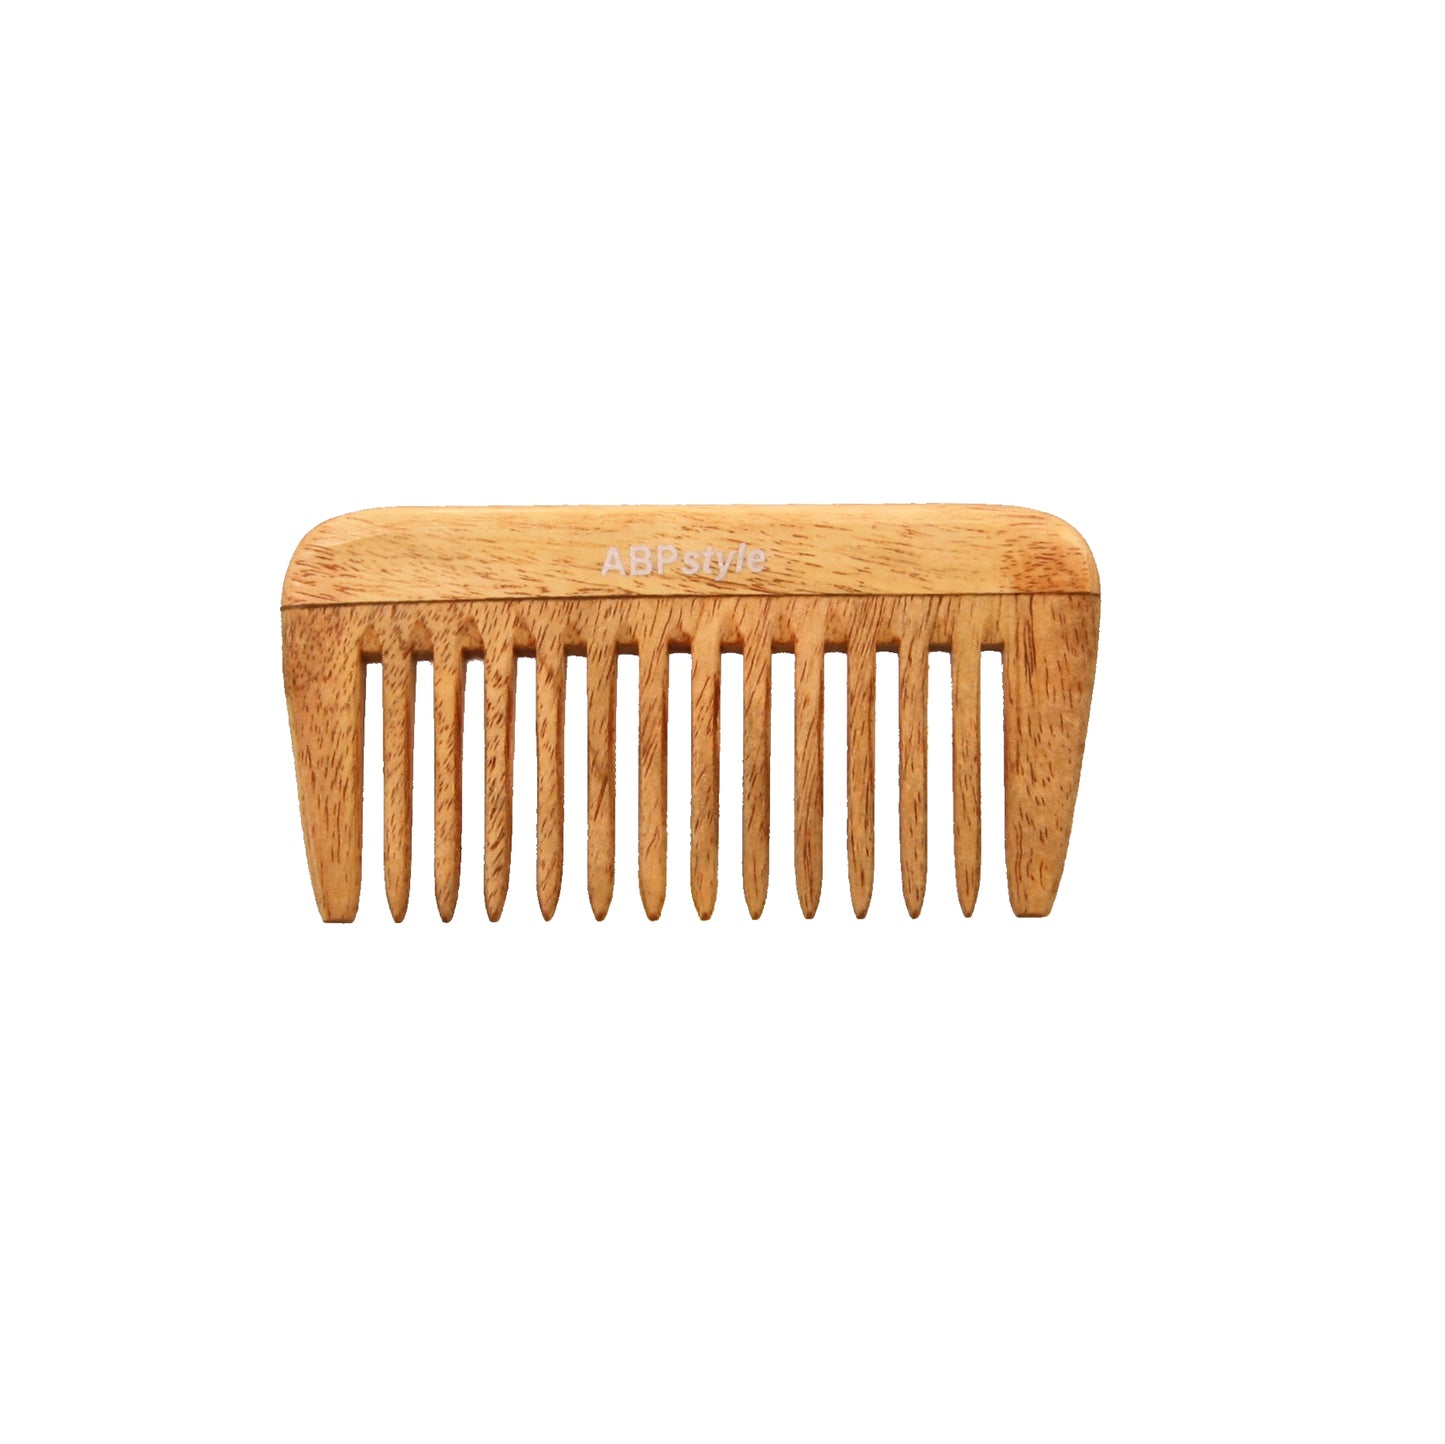 ABPStyle, 4in Neem Wood Tall Rake Comb. Anti-Static, Damage Free, Promotes Hair Growth, Environmentally Friendly